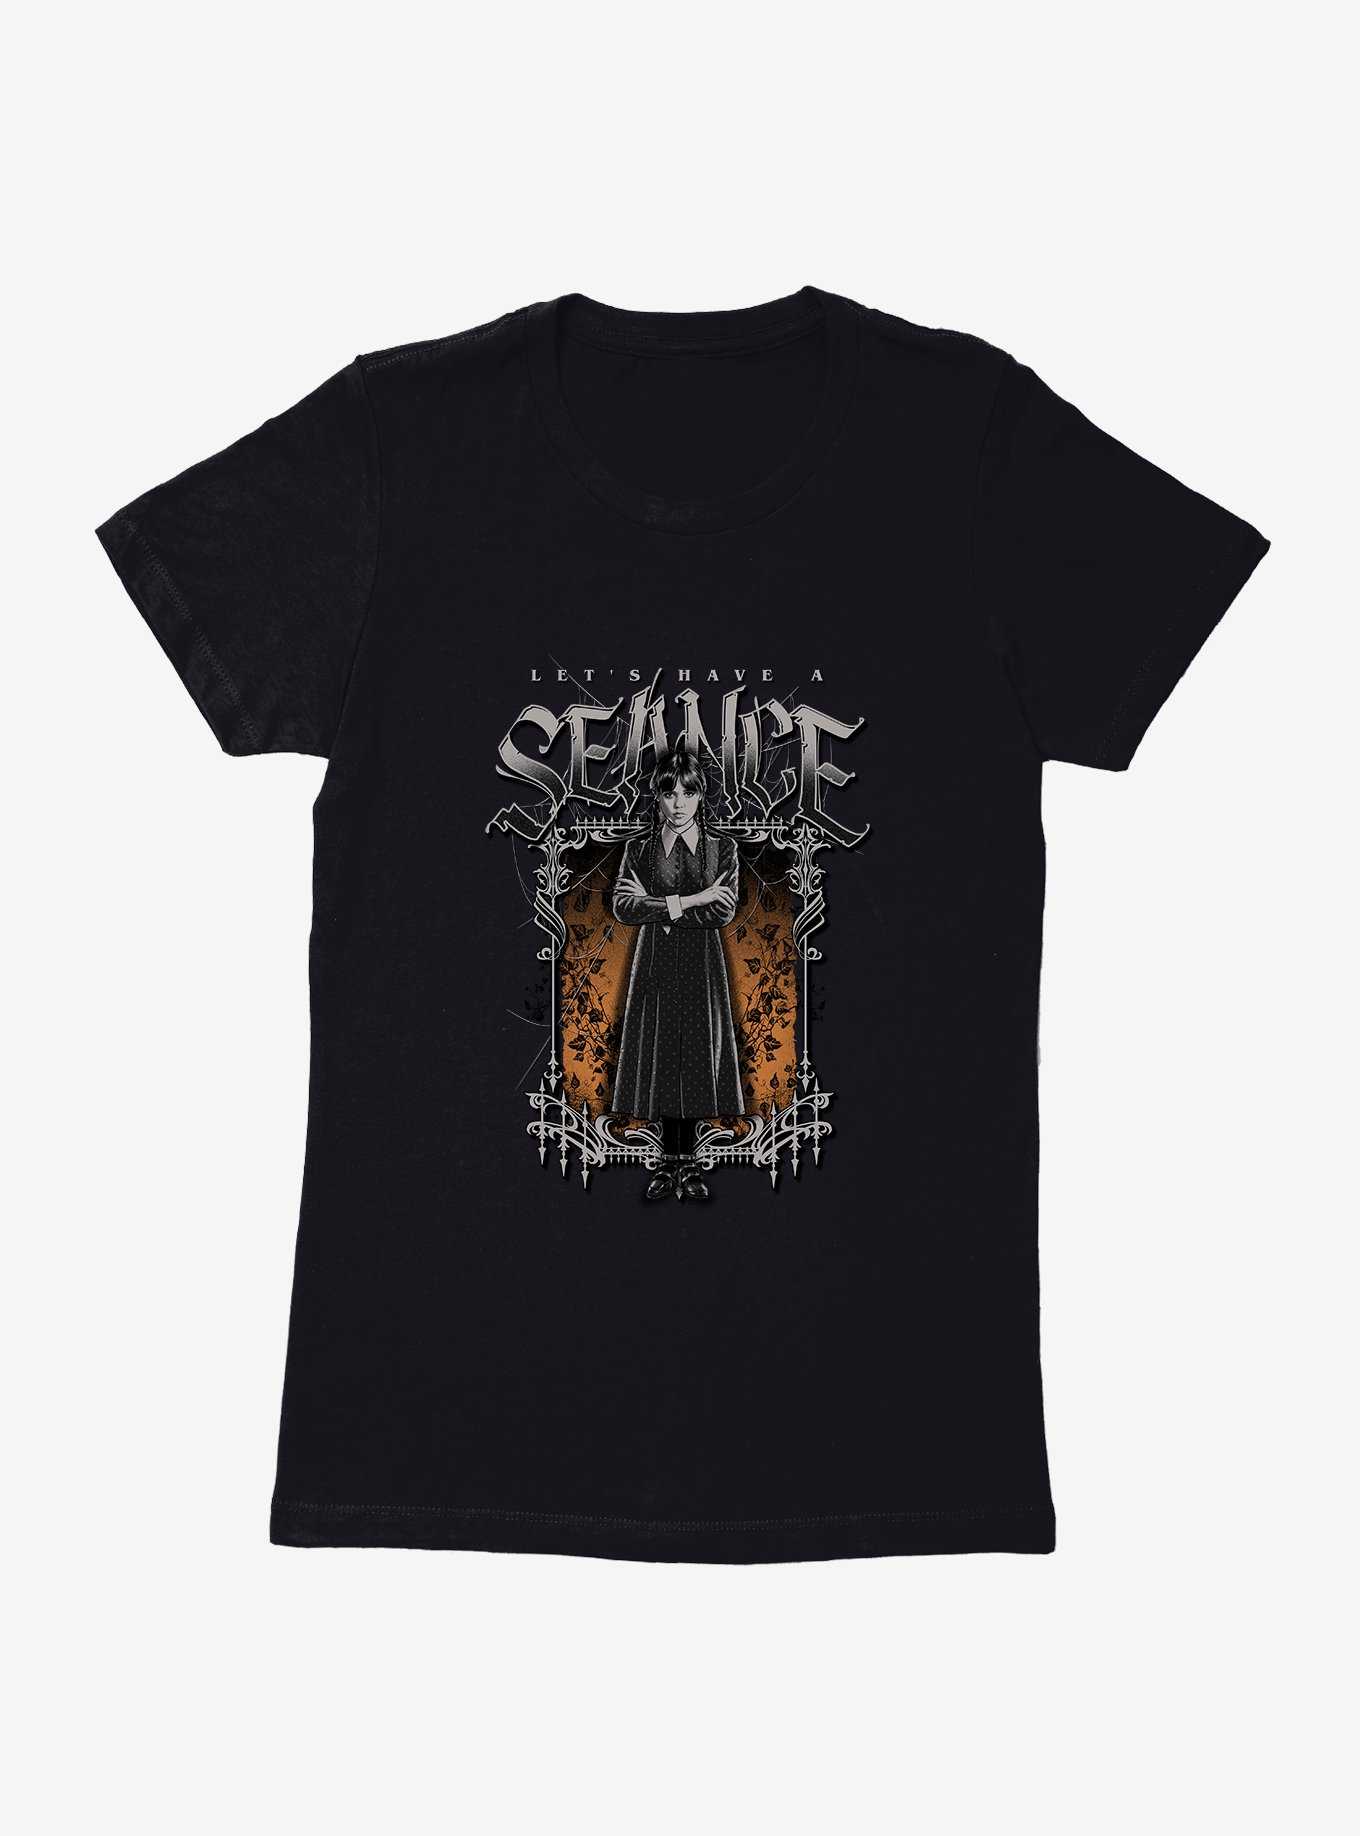 Wednesday Let's Have A Seance Womens T-Shirt, , hi-res